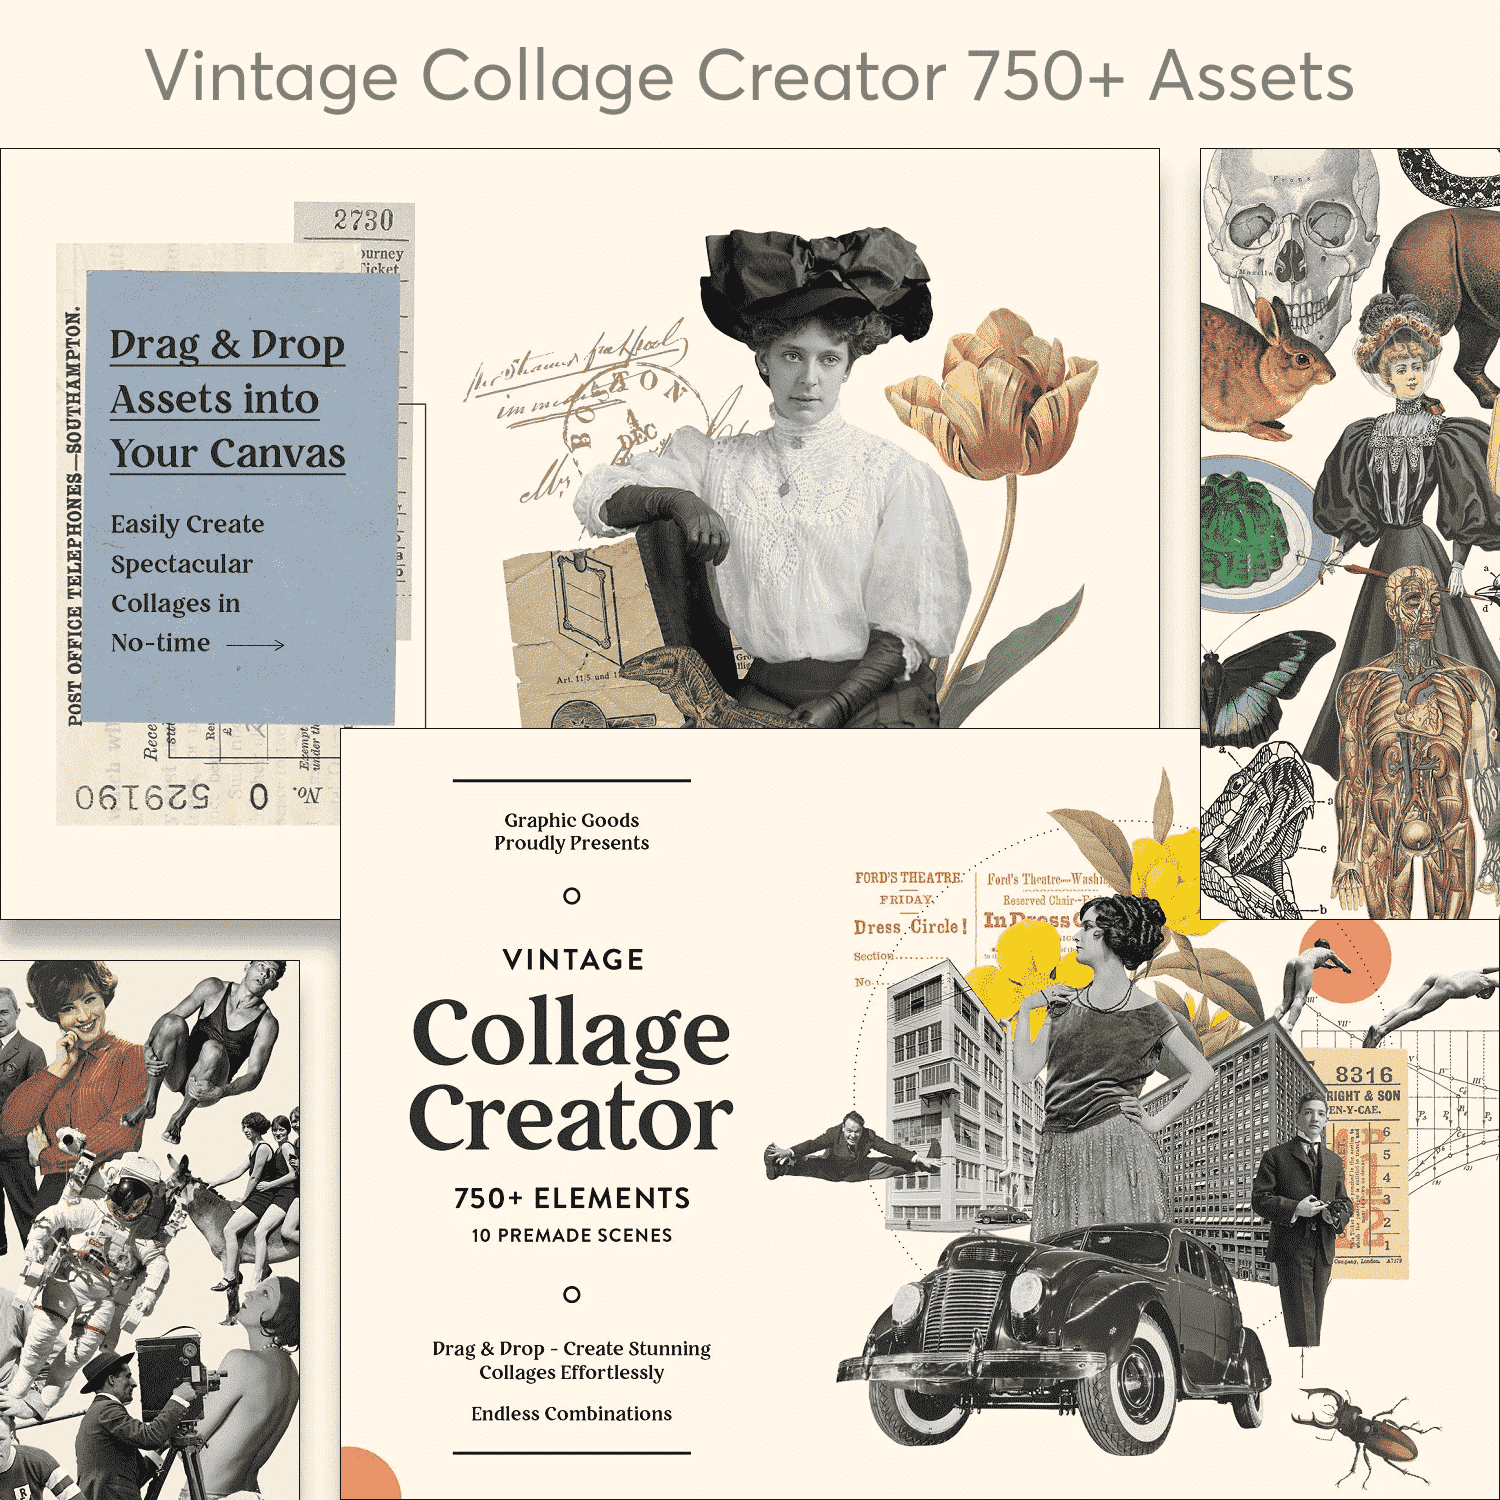 Vintage Collage Creator 750+ Assets - "Easily Create Spectacular Collages In No-Time".